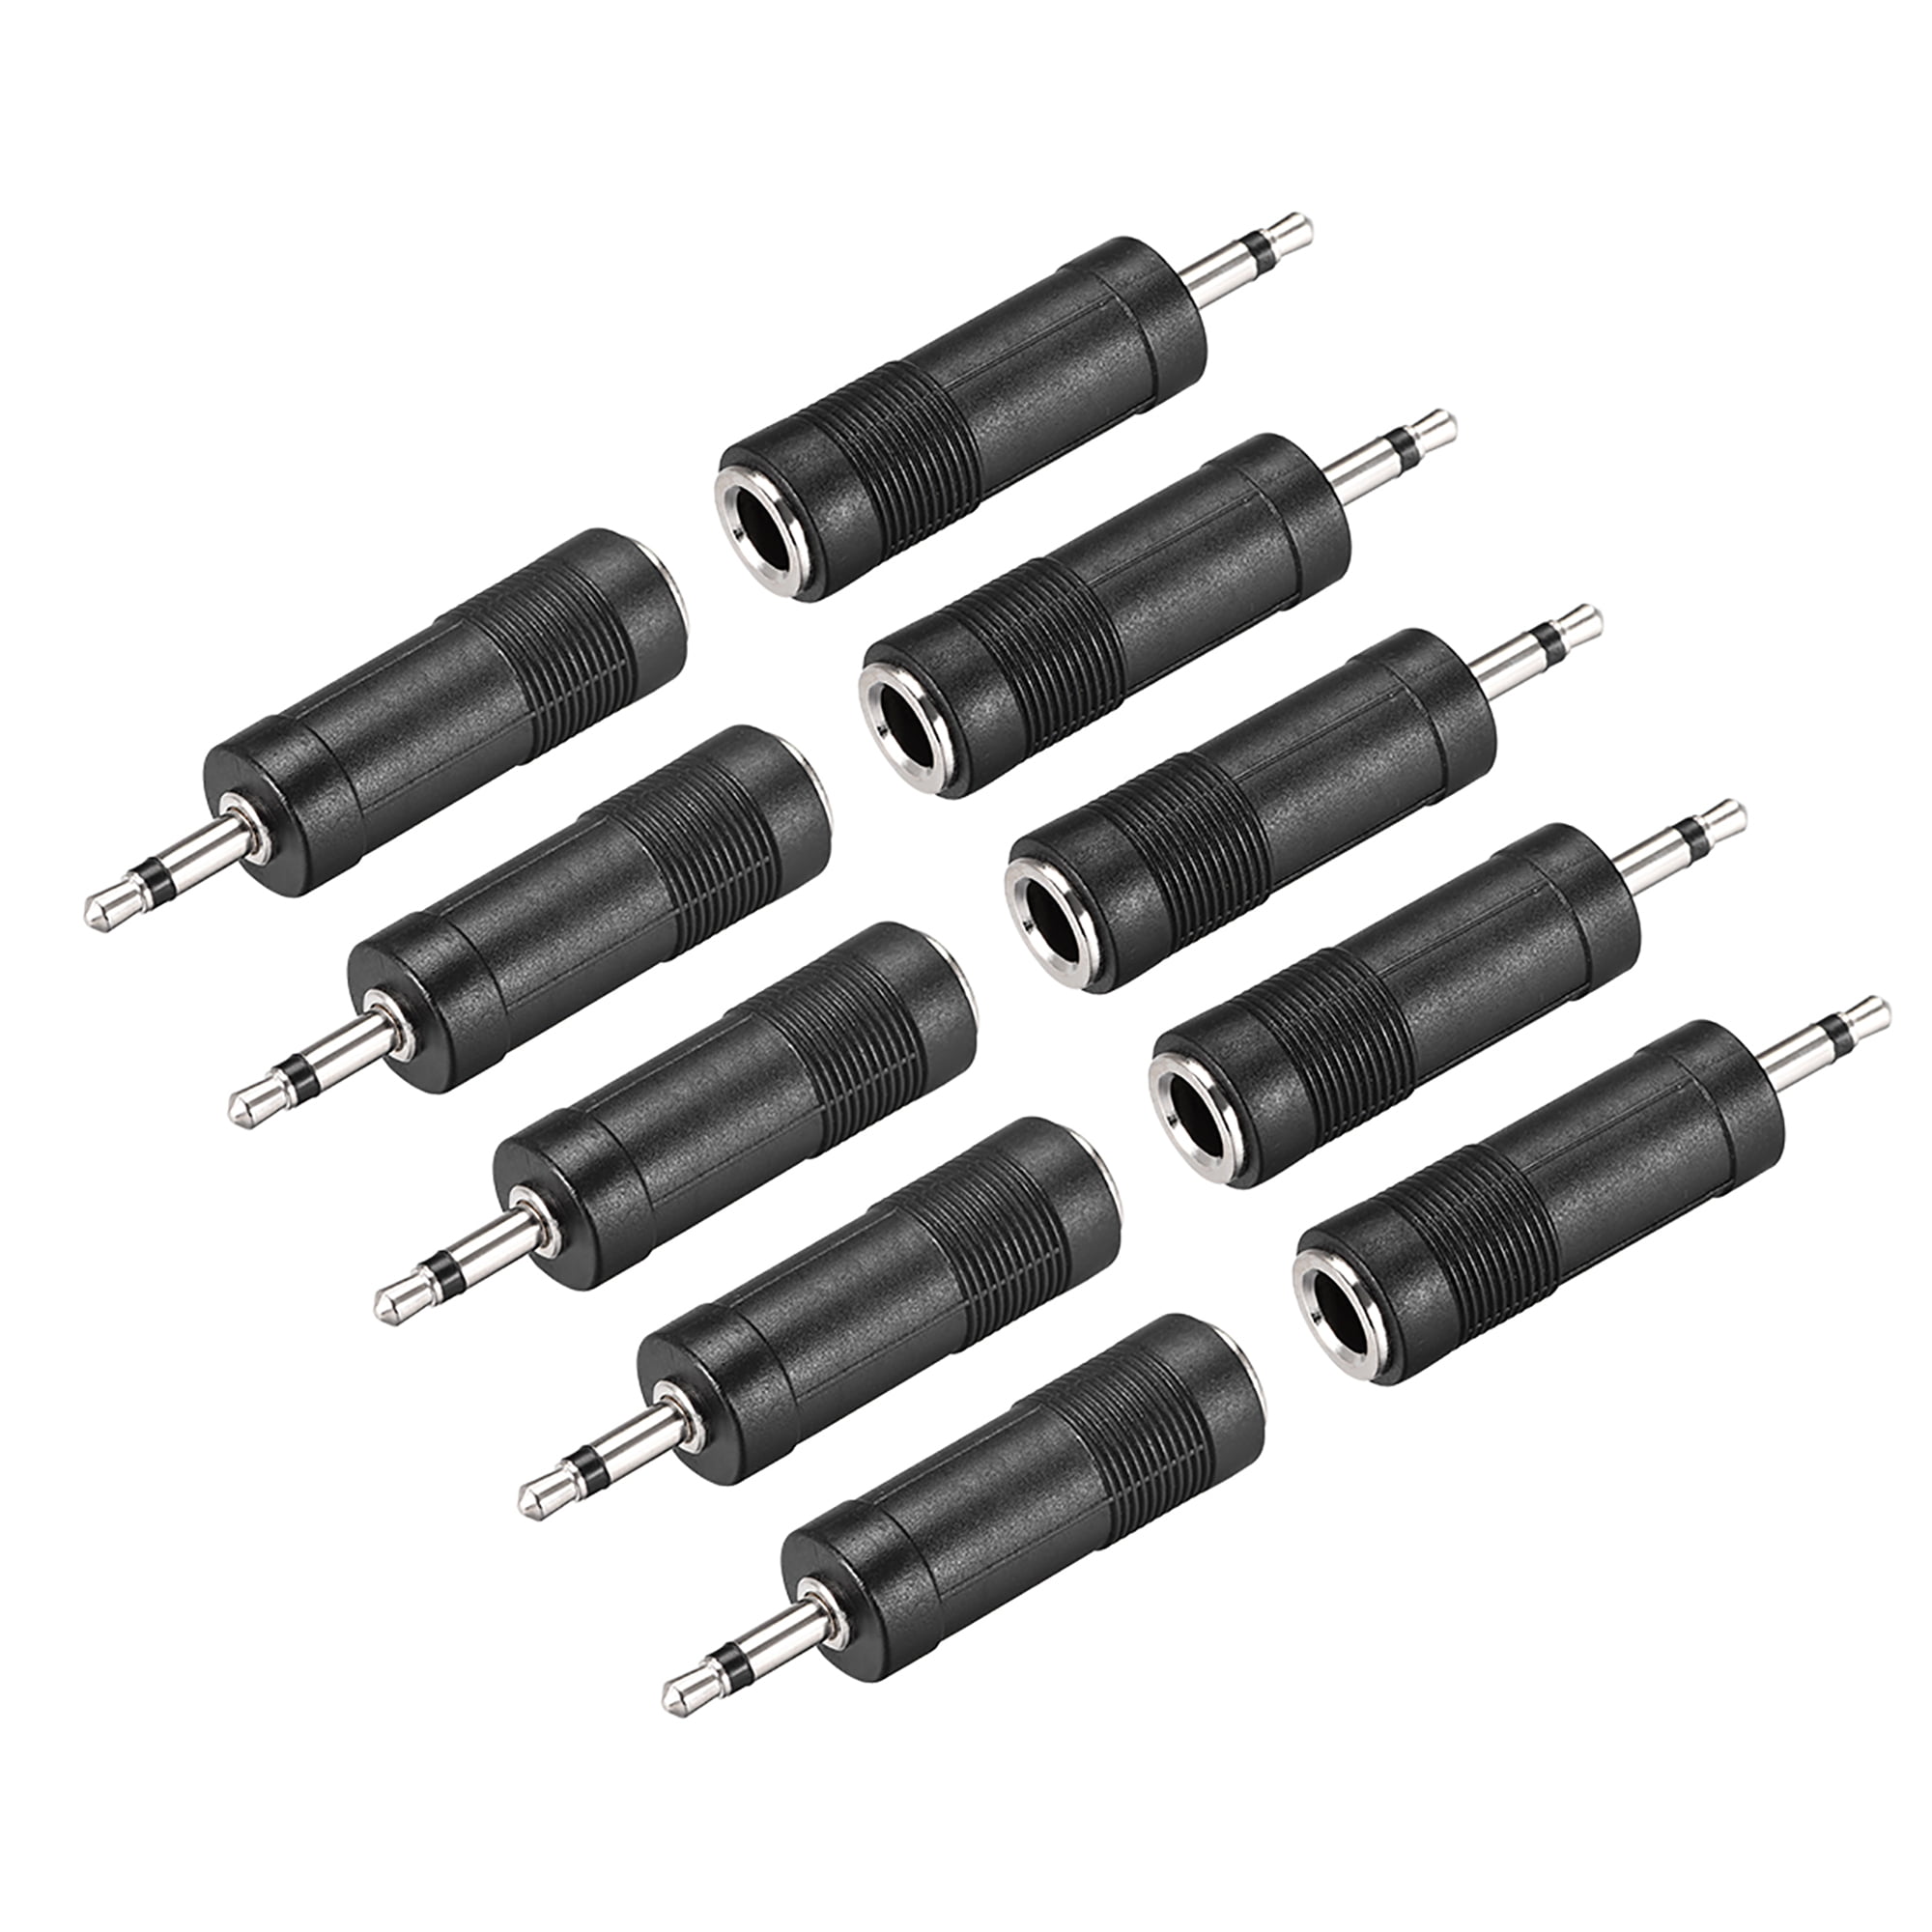 10pcs DC 3.5mm TRRS 4 Pole 90°Male To Angled 3 Pole 2 Ring Male Audio Lead Cable 